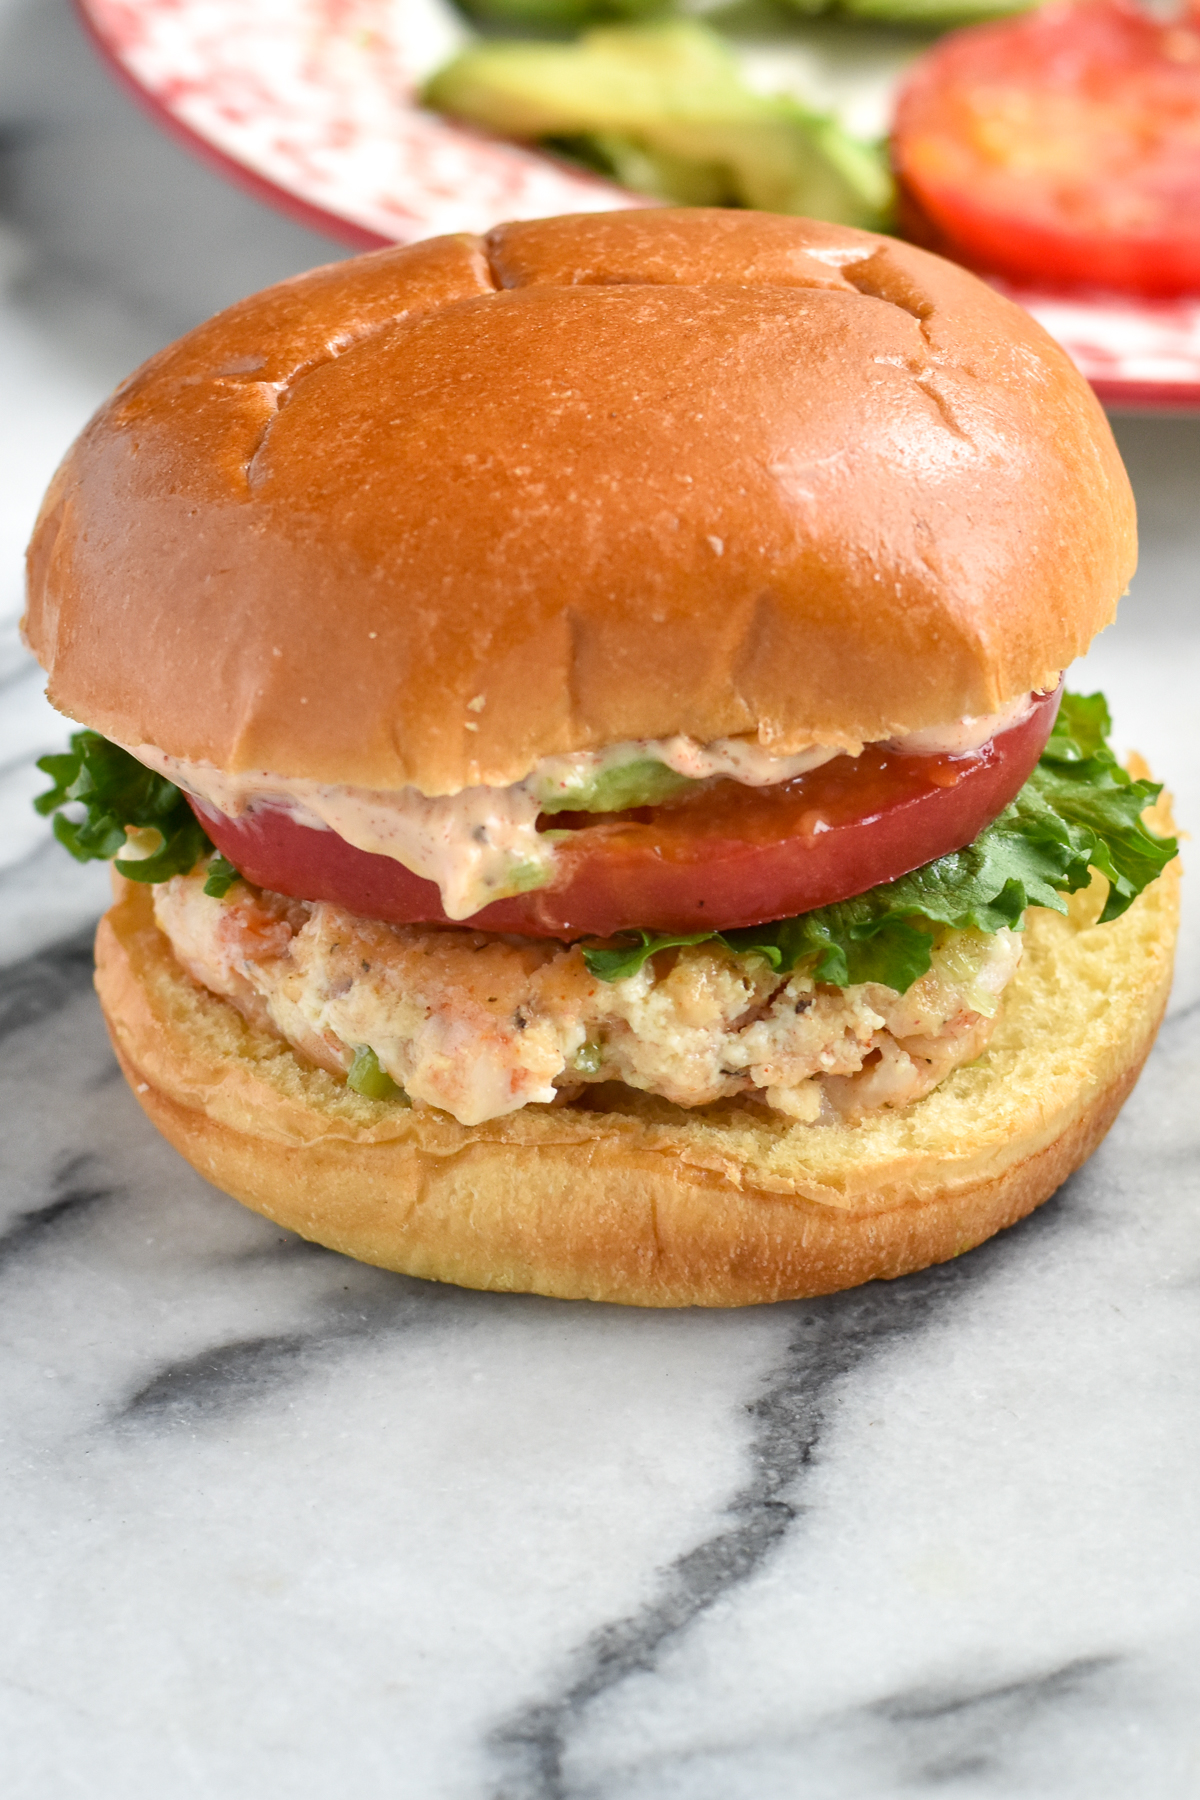 Flavorful, tender Shrimp Burgers are a light, alternative to a traditional beef burger. The burgers are topped with avocado, tomato and lettuce.